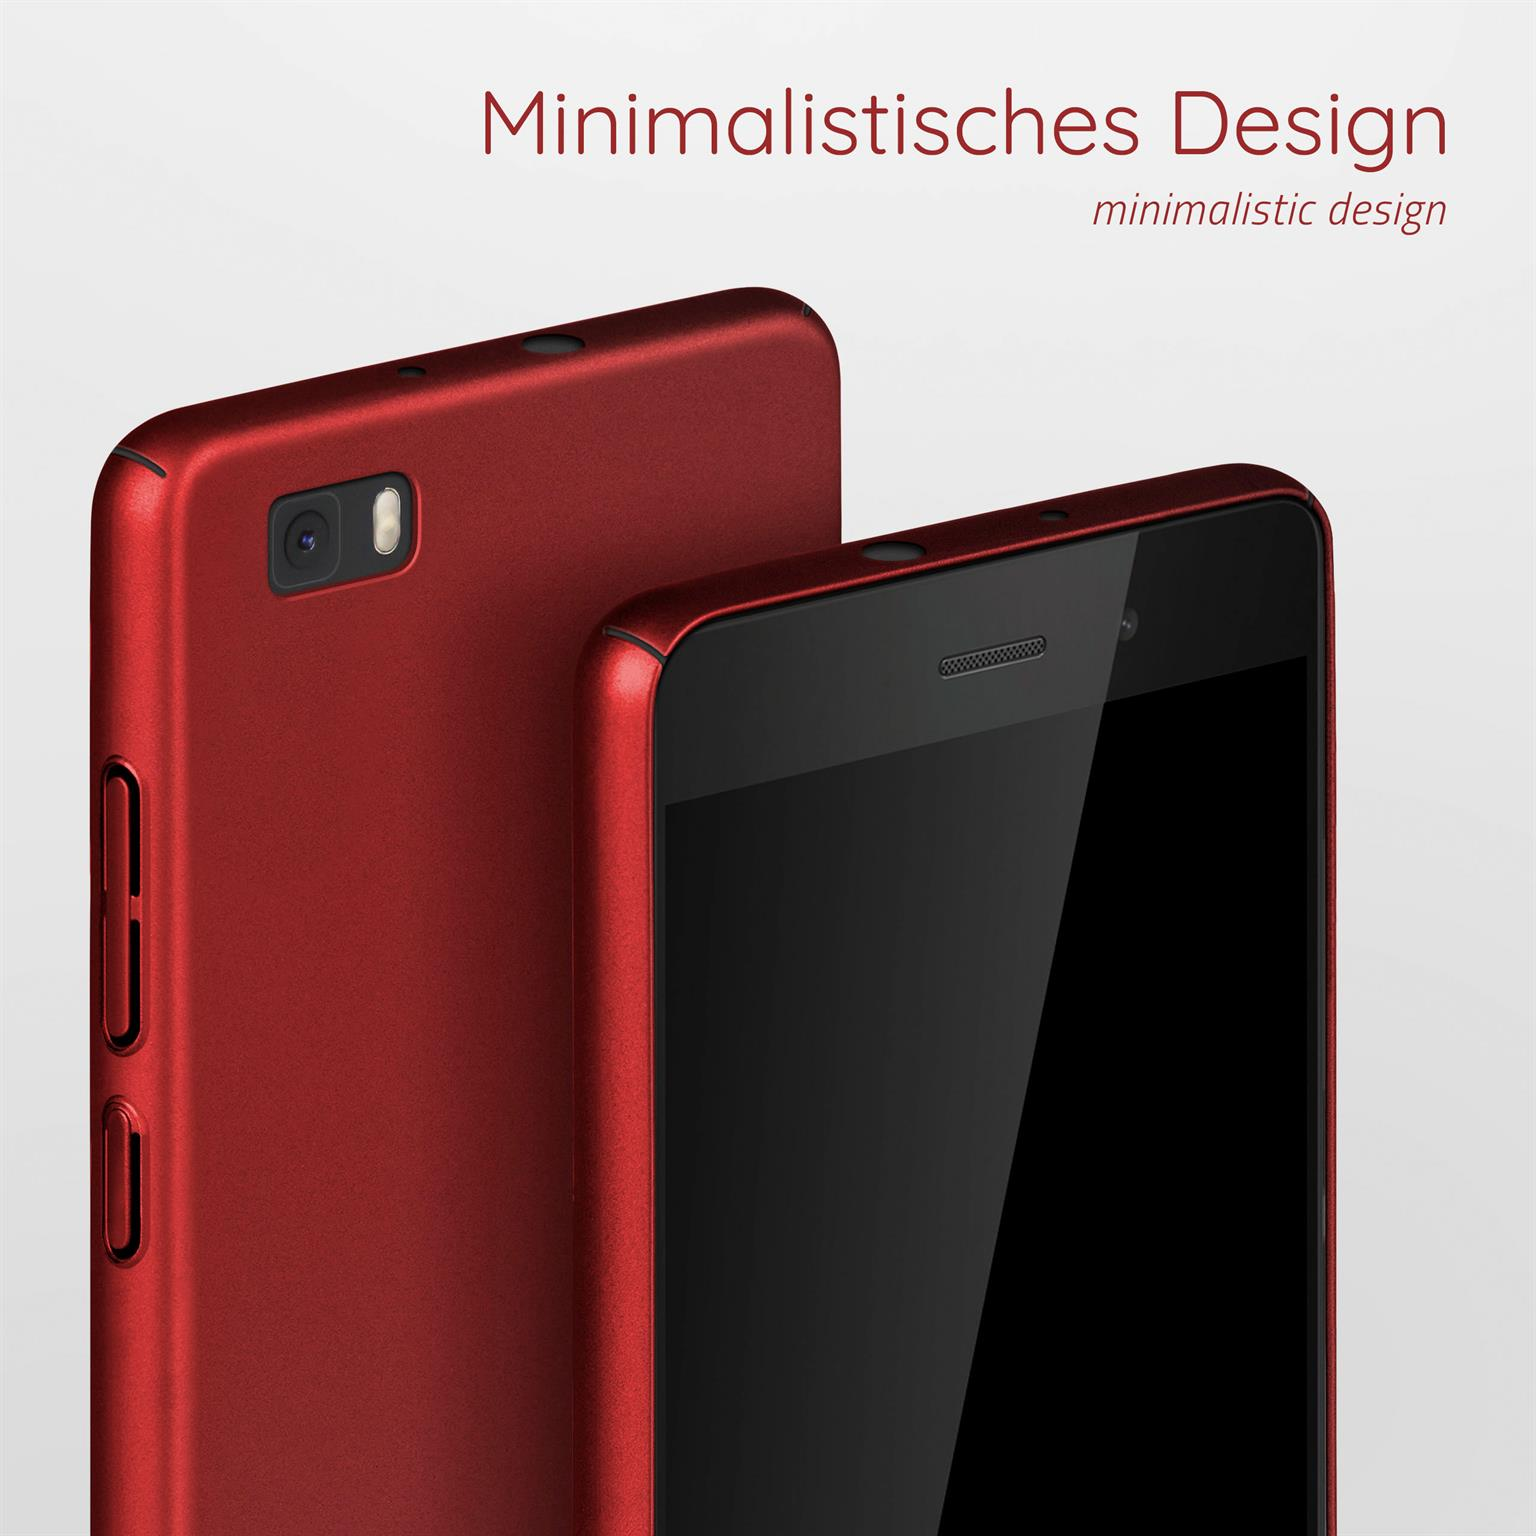 Backcover, Alpha P8 Case, Rot 2015, Lite Huawei, MOEX